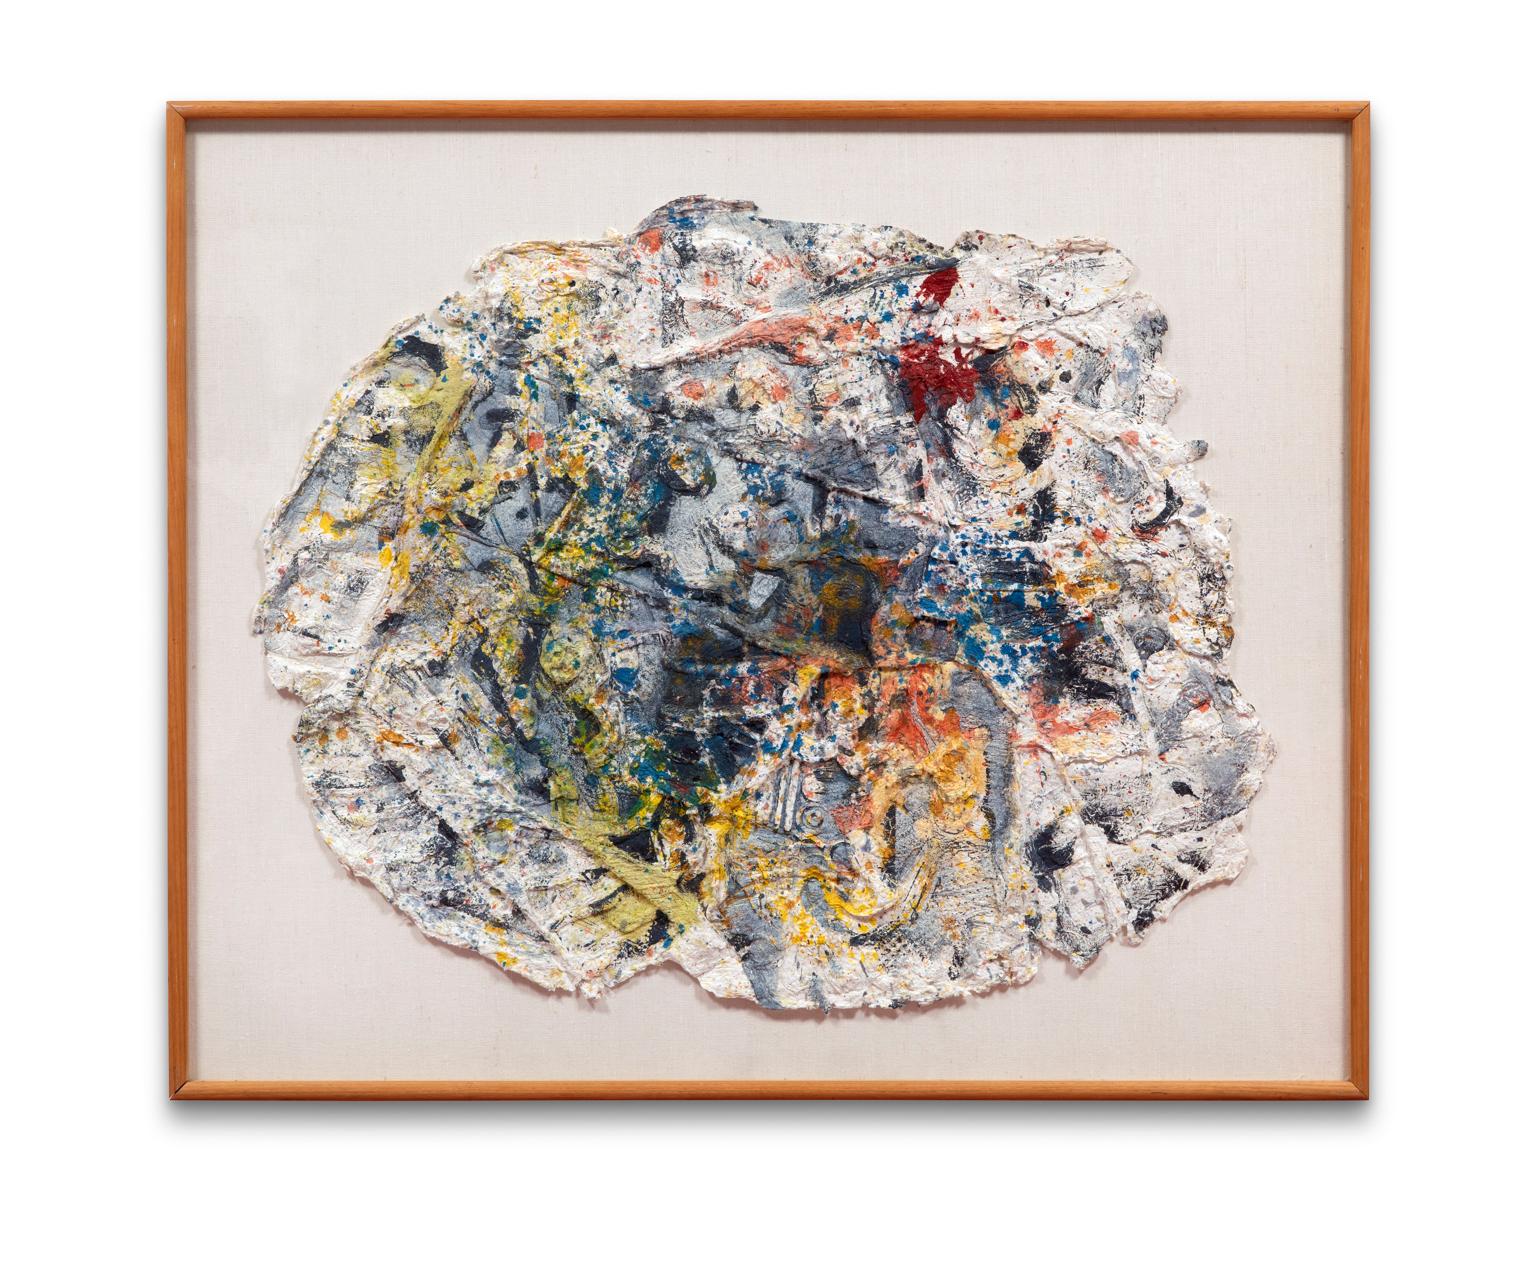 SALE ONE WEEK ONLY

“Arrow Head #4” was created by Sam Gilliam, one of the great innovators in postwar American painting. The thick handmade paper is rich with folds and texture and the colors lively. Gilliam has titled, dated and signed the piece